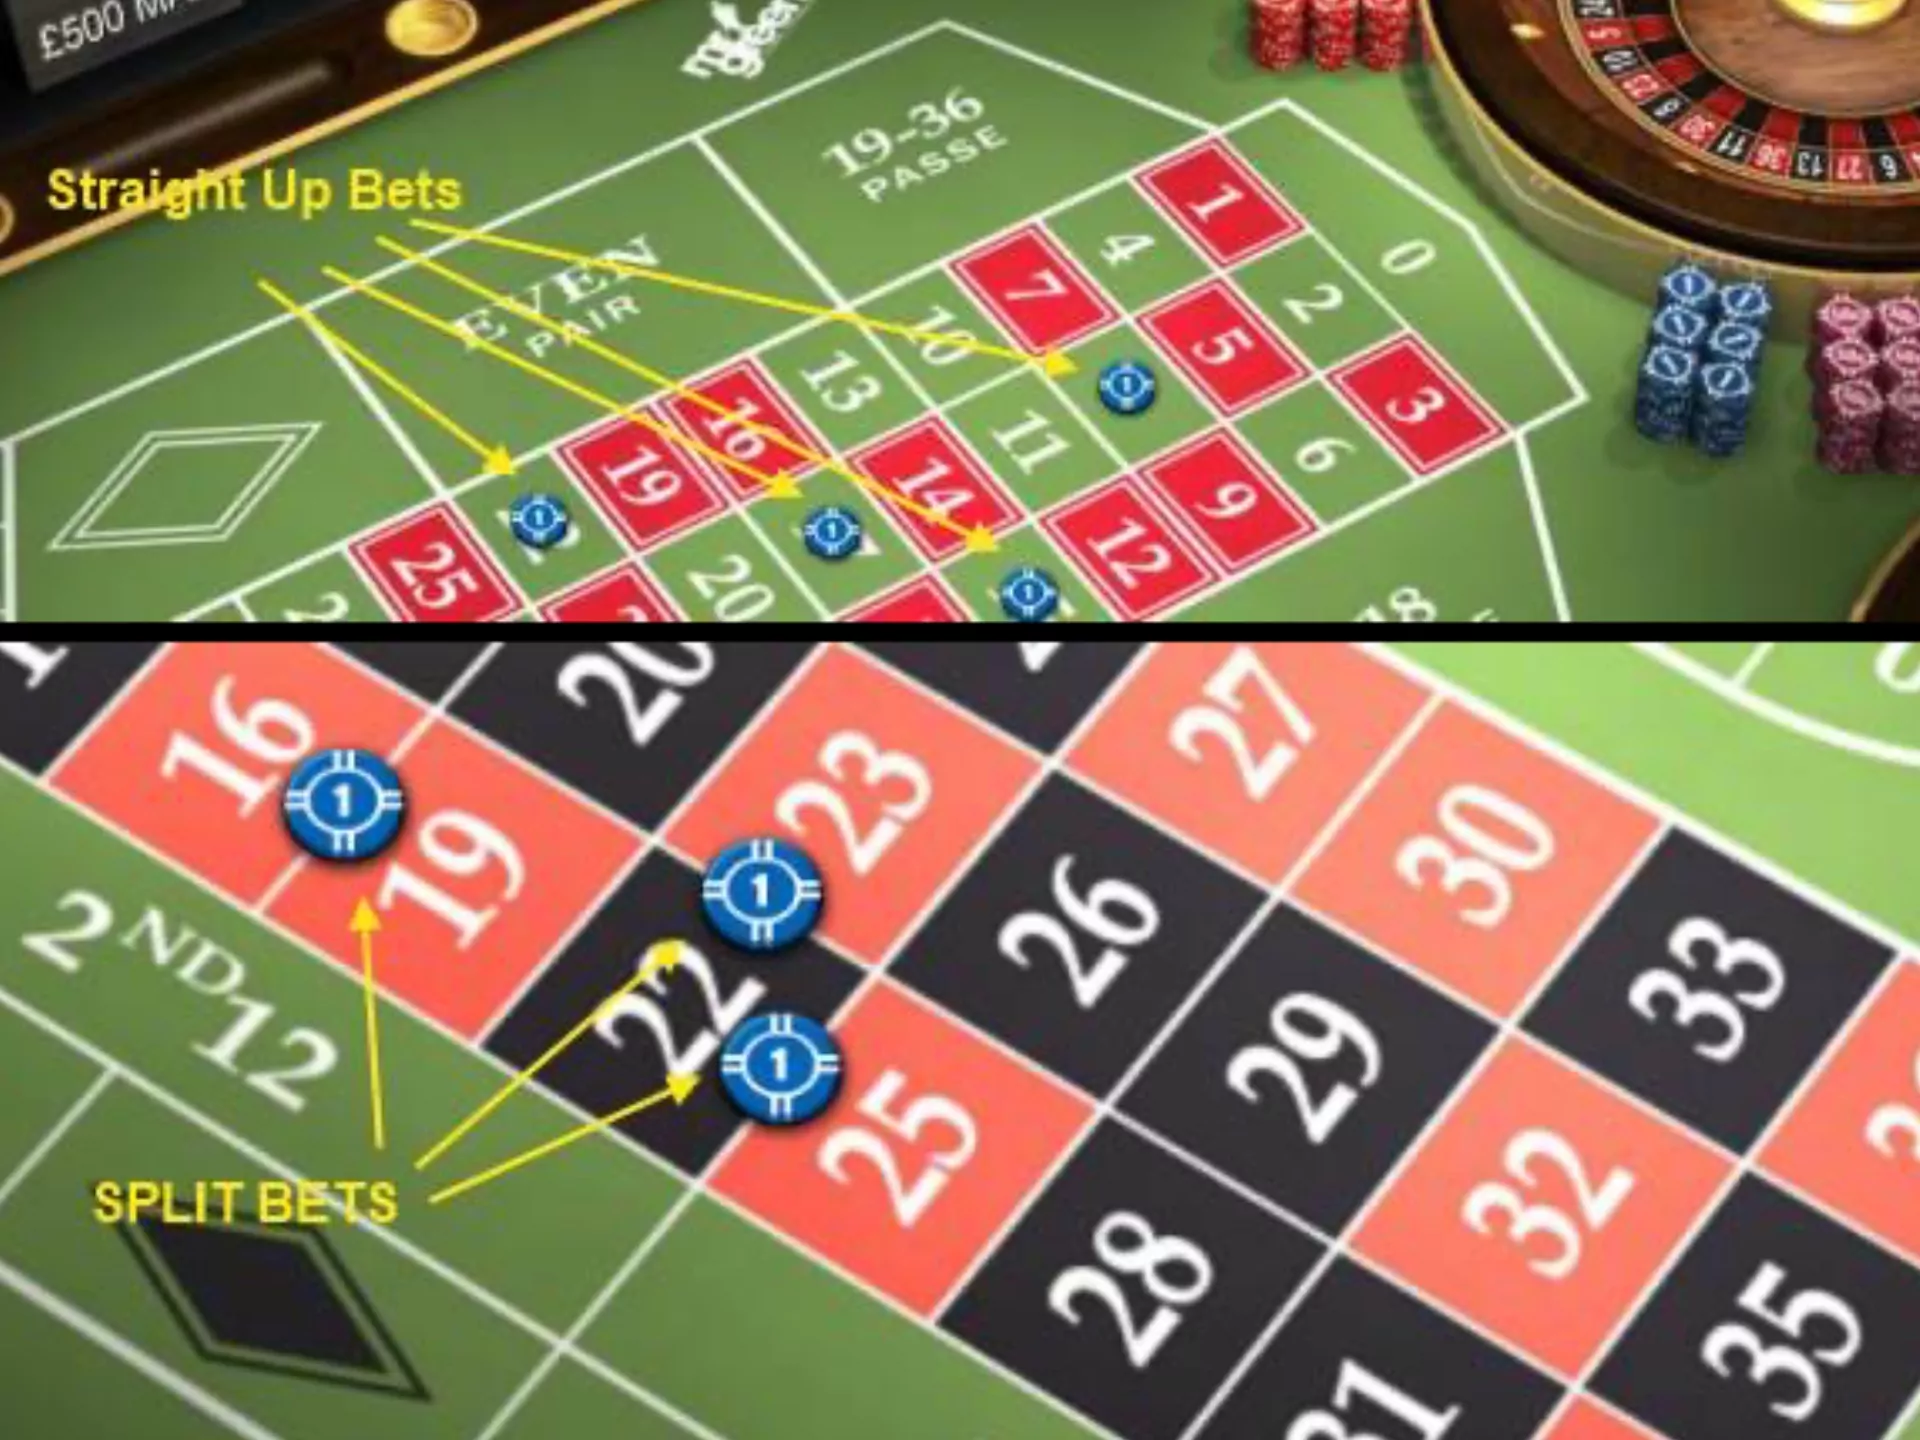 Choose the most profitable bet and place it on the online roulette.